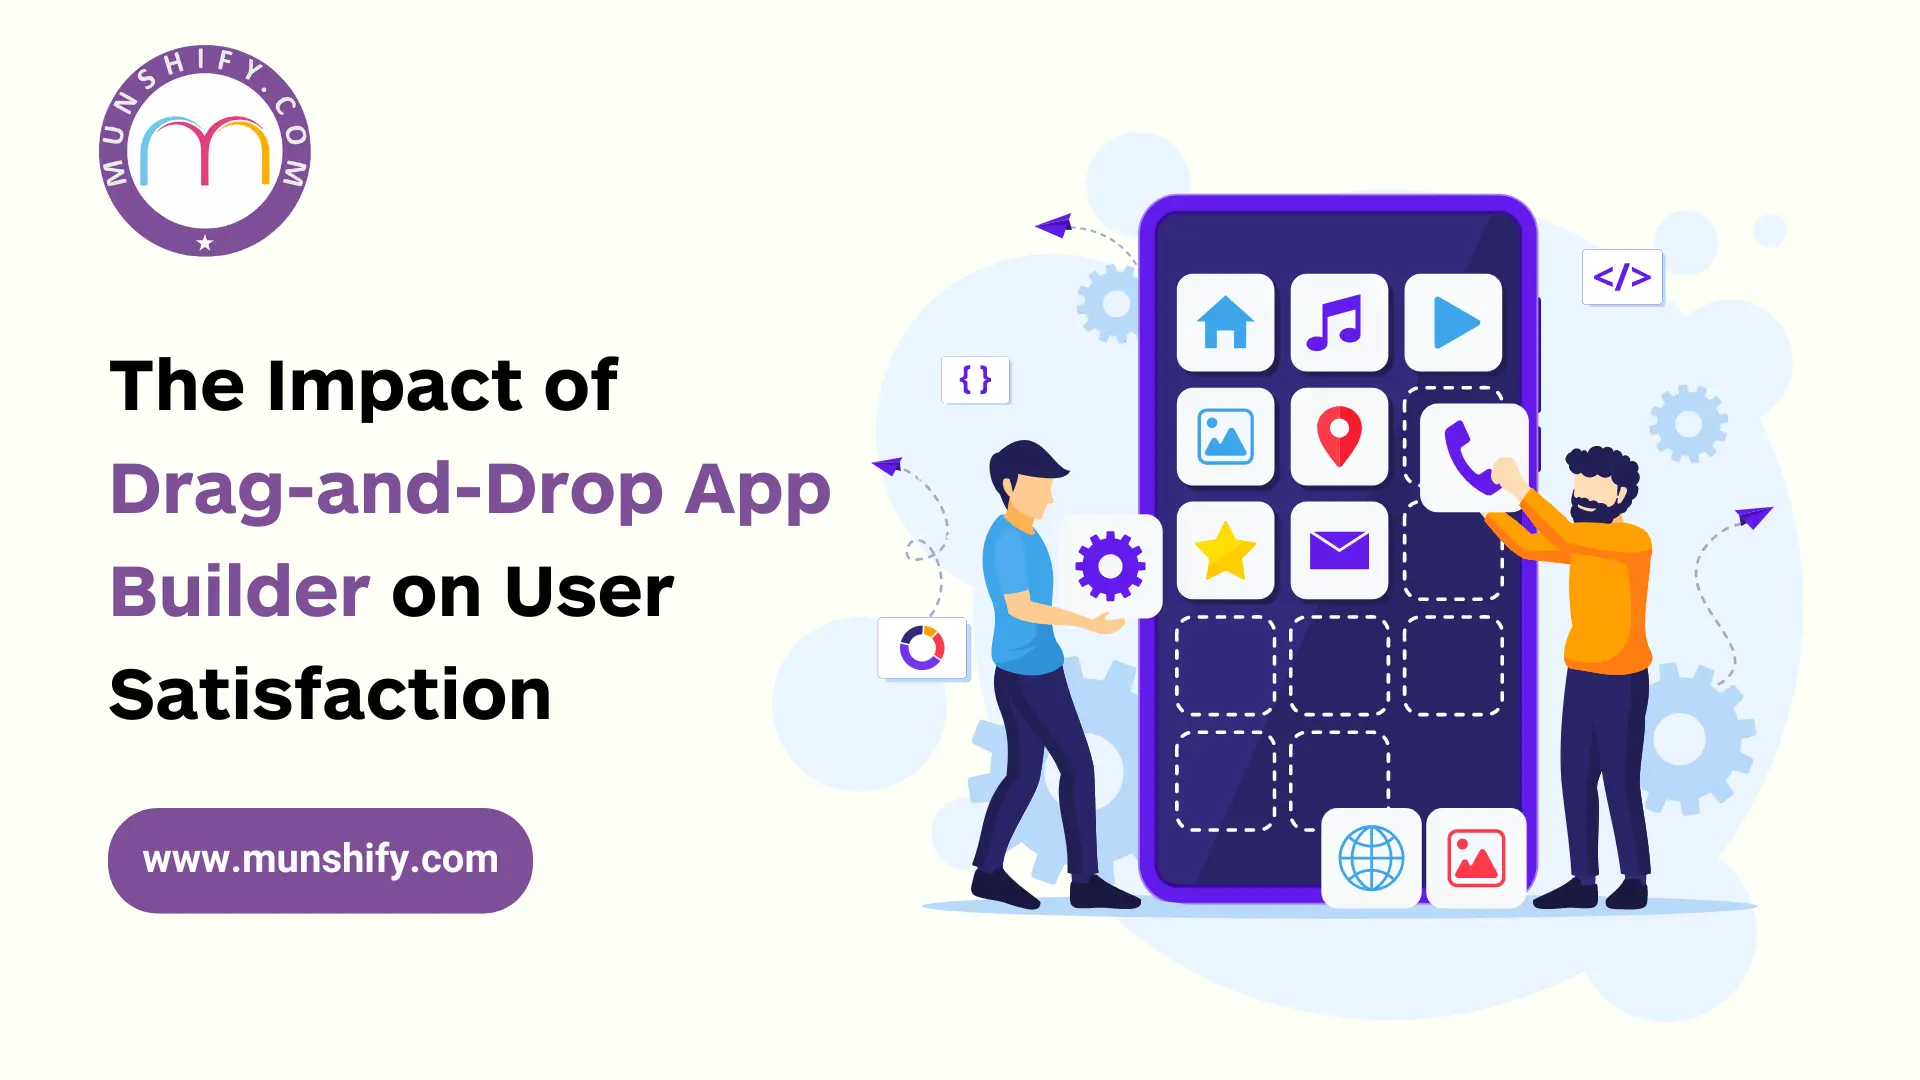 The Impact of Drag-and-Drop App Builder on User Satisfaction.